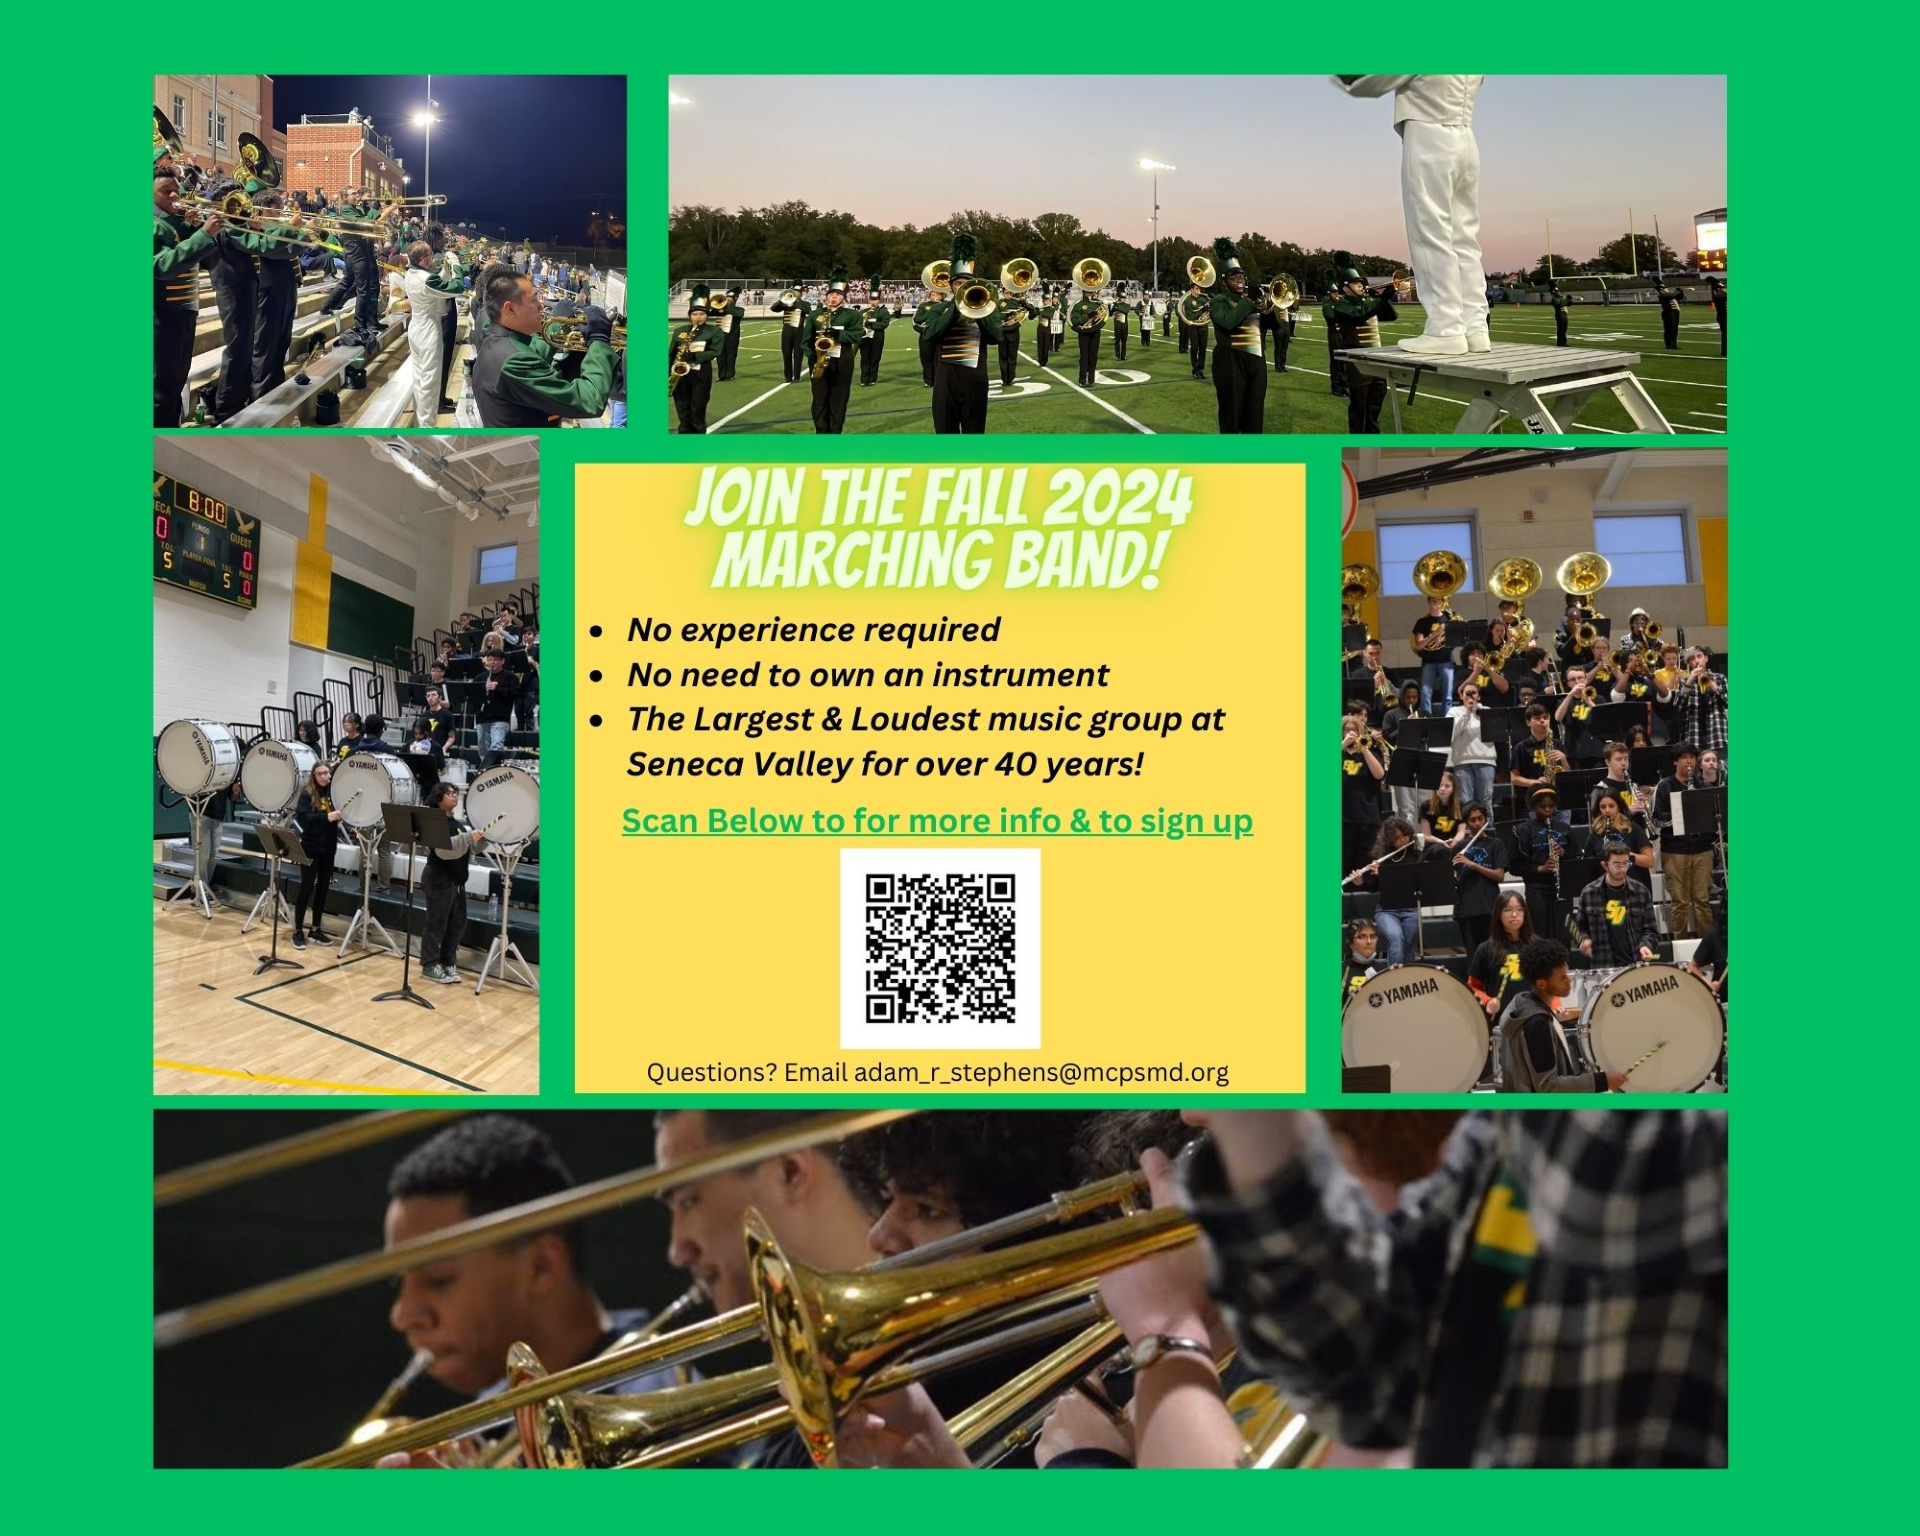 SVHS Fall 2024 Marching Band Flyer